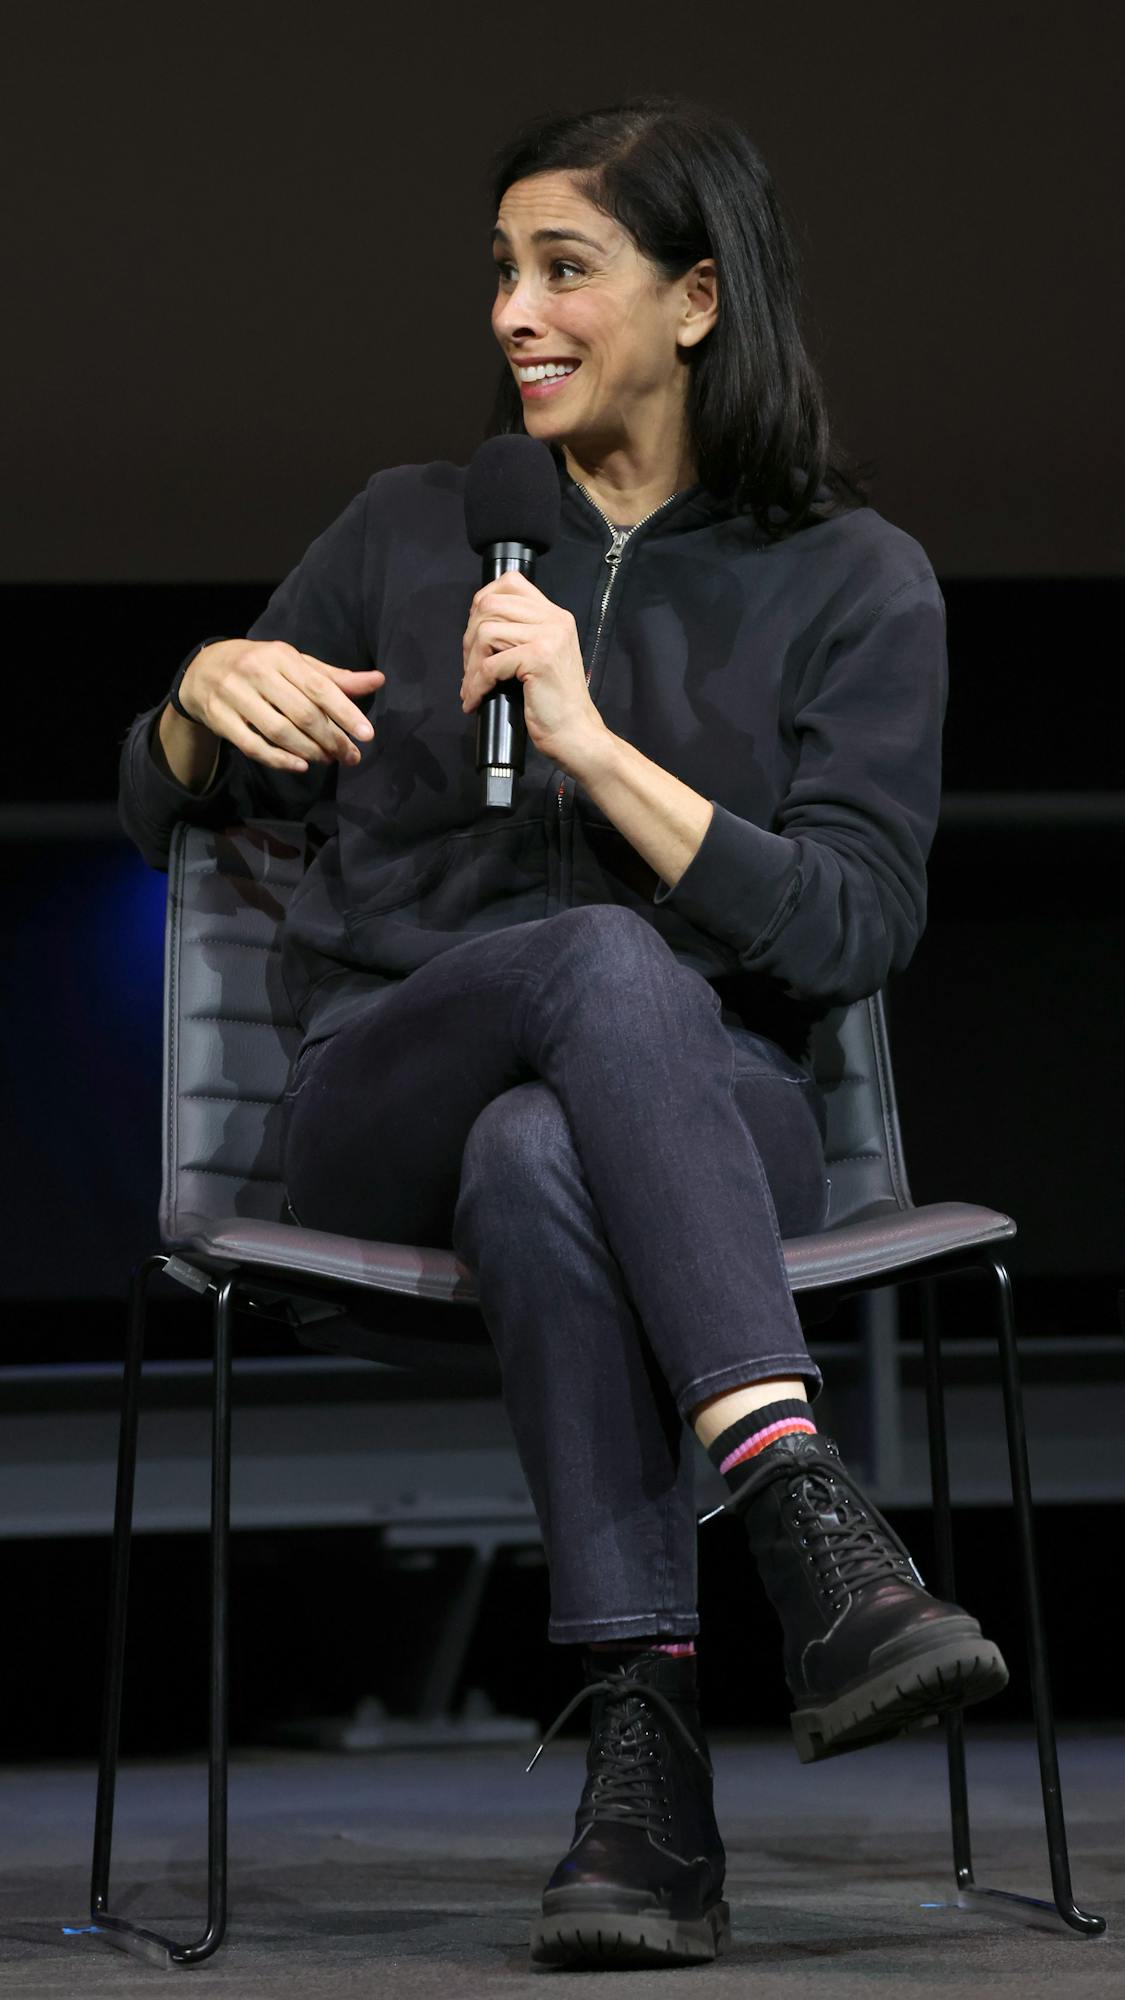 Sarah Silverman wears jeans and a black sweater and laughs into a mic.